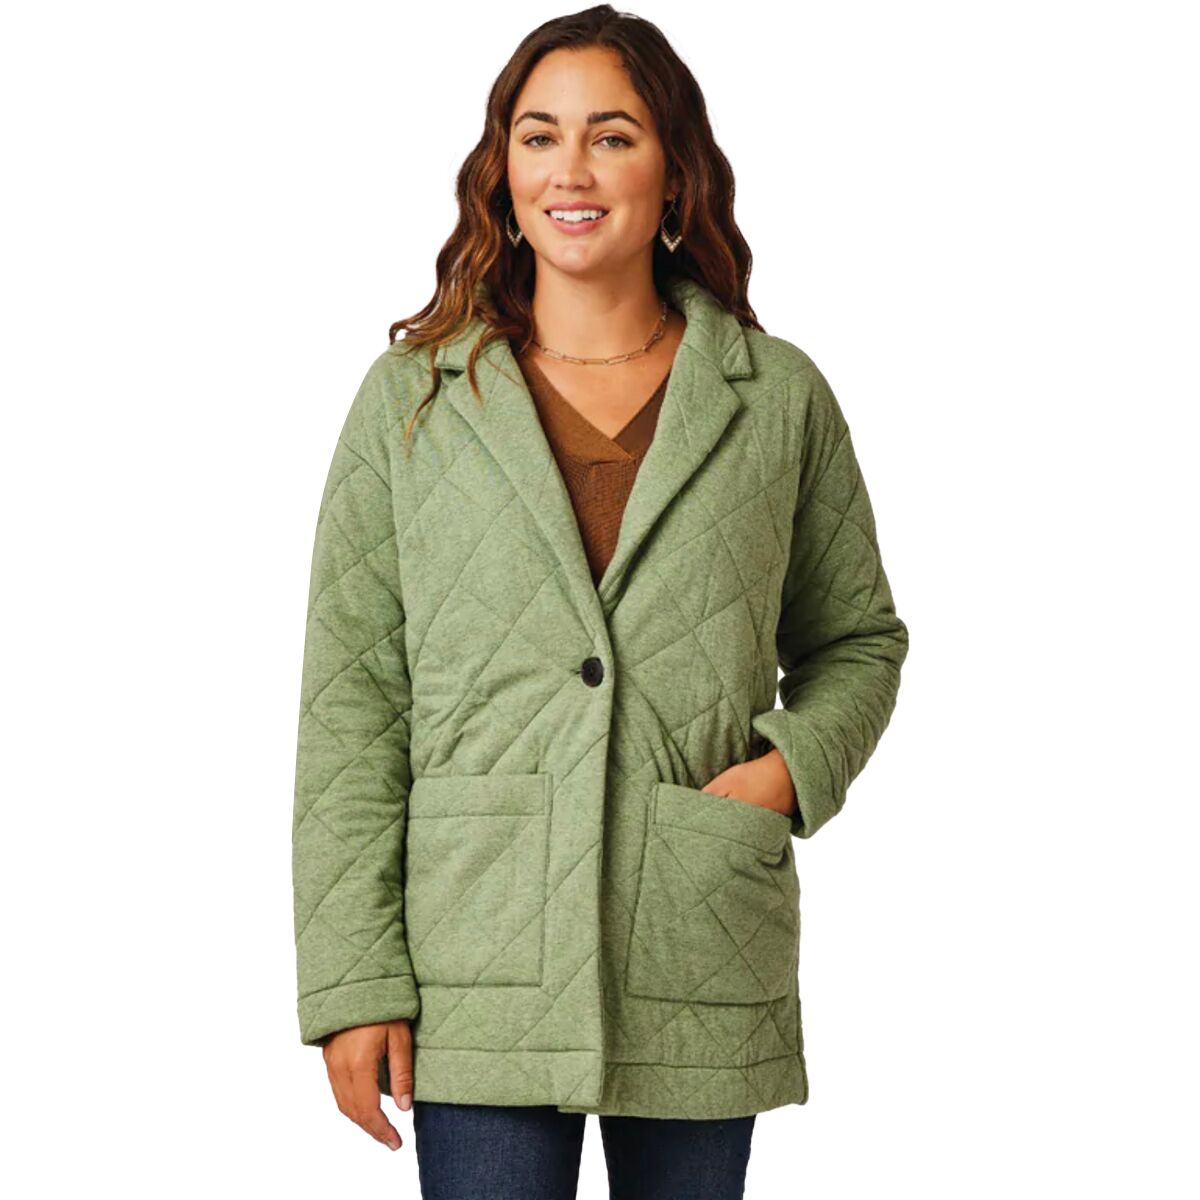 Carve Designs Maggie Quilted Topper Jacket - Women's